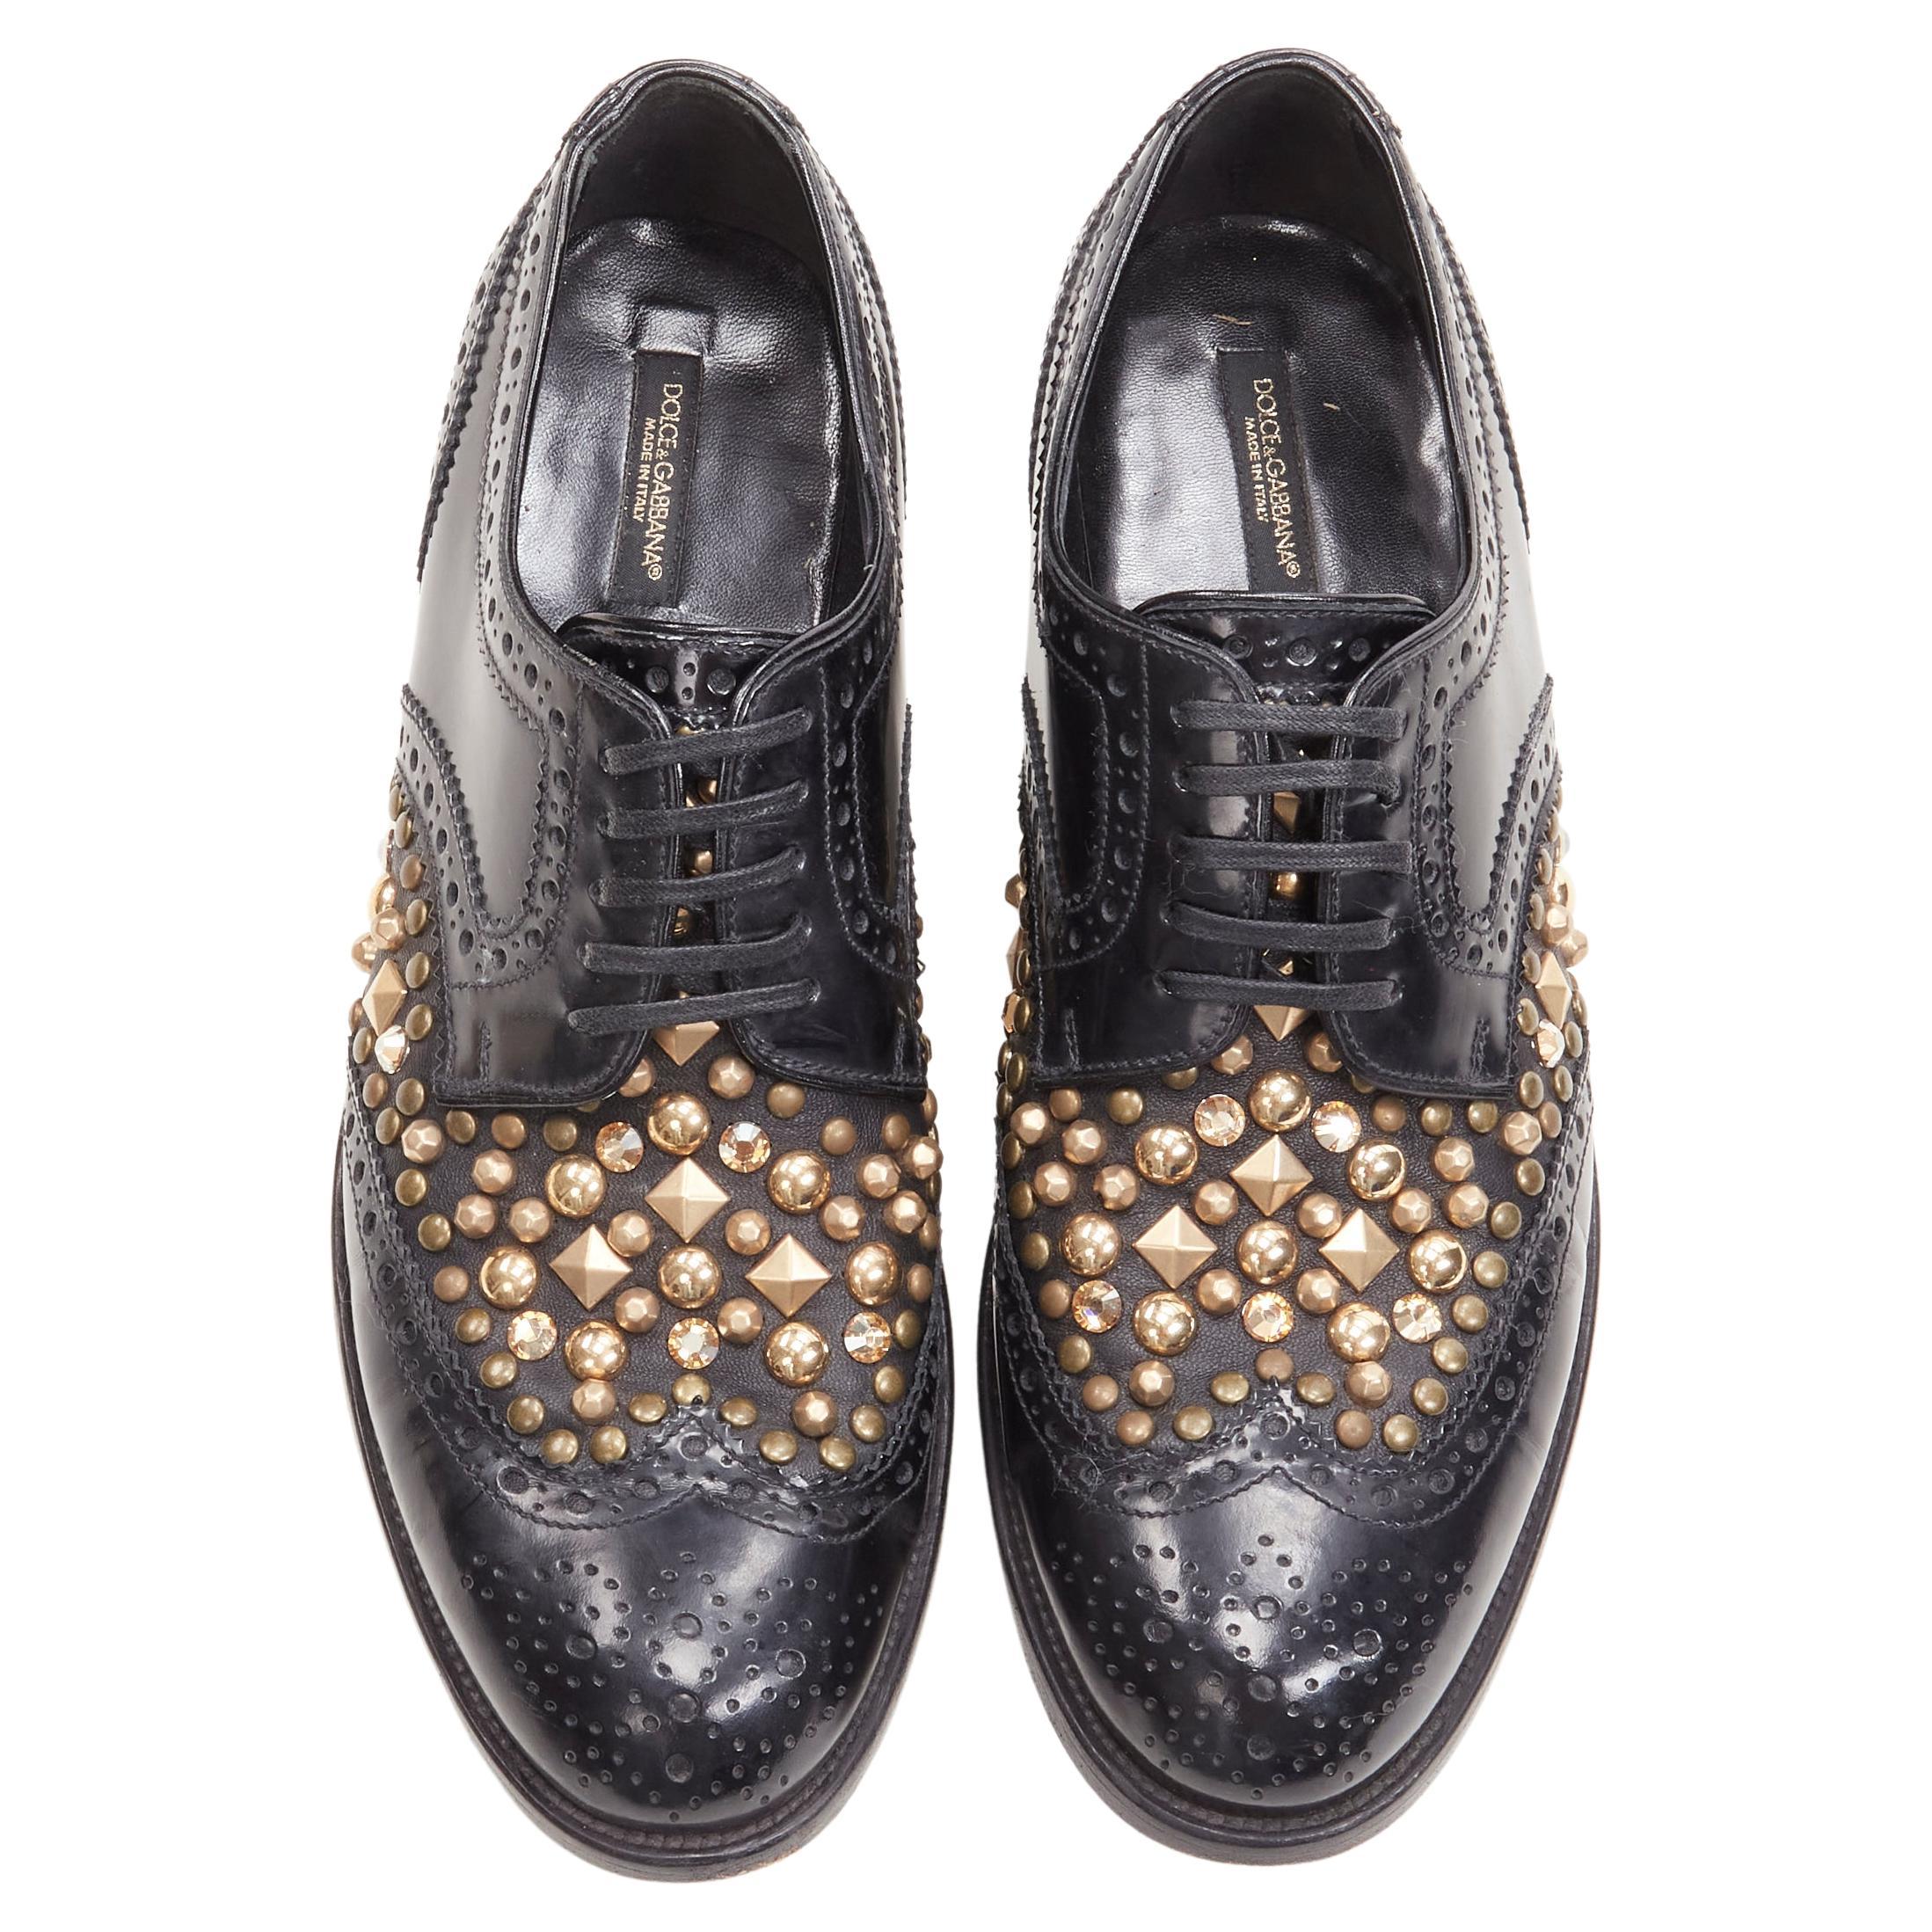 DOLCE GABBANA black gold crystal studded perforated brogue loafer EU38
Brand: Dolce Gabbana
Designer: Domenico Dolce and Stefano Gabbana
Material: Leather
Color: Black
Pattern: Studded
Closure: Lace Up
Extra Detail: Crystal and antique gold-tone